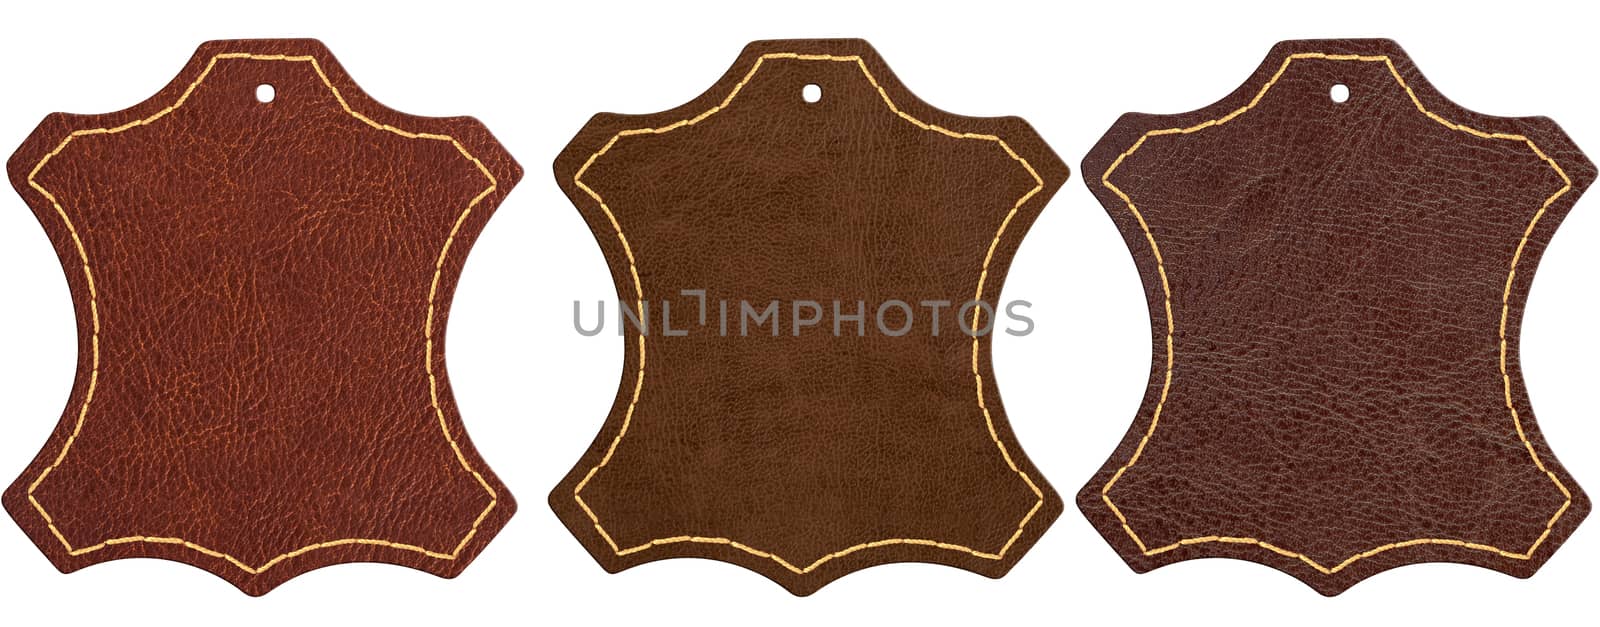 Three brown leather signs on white background by mkos83